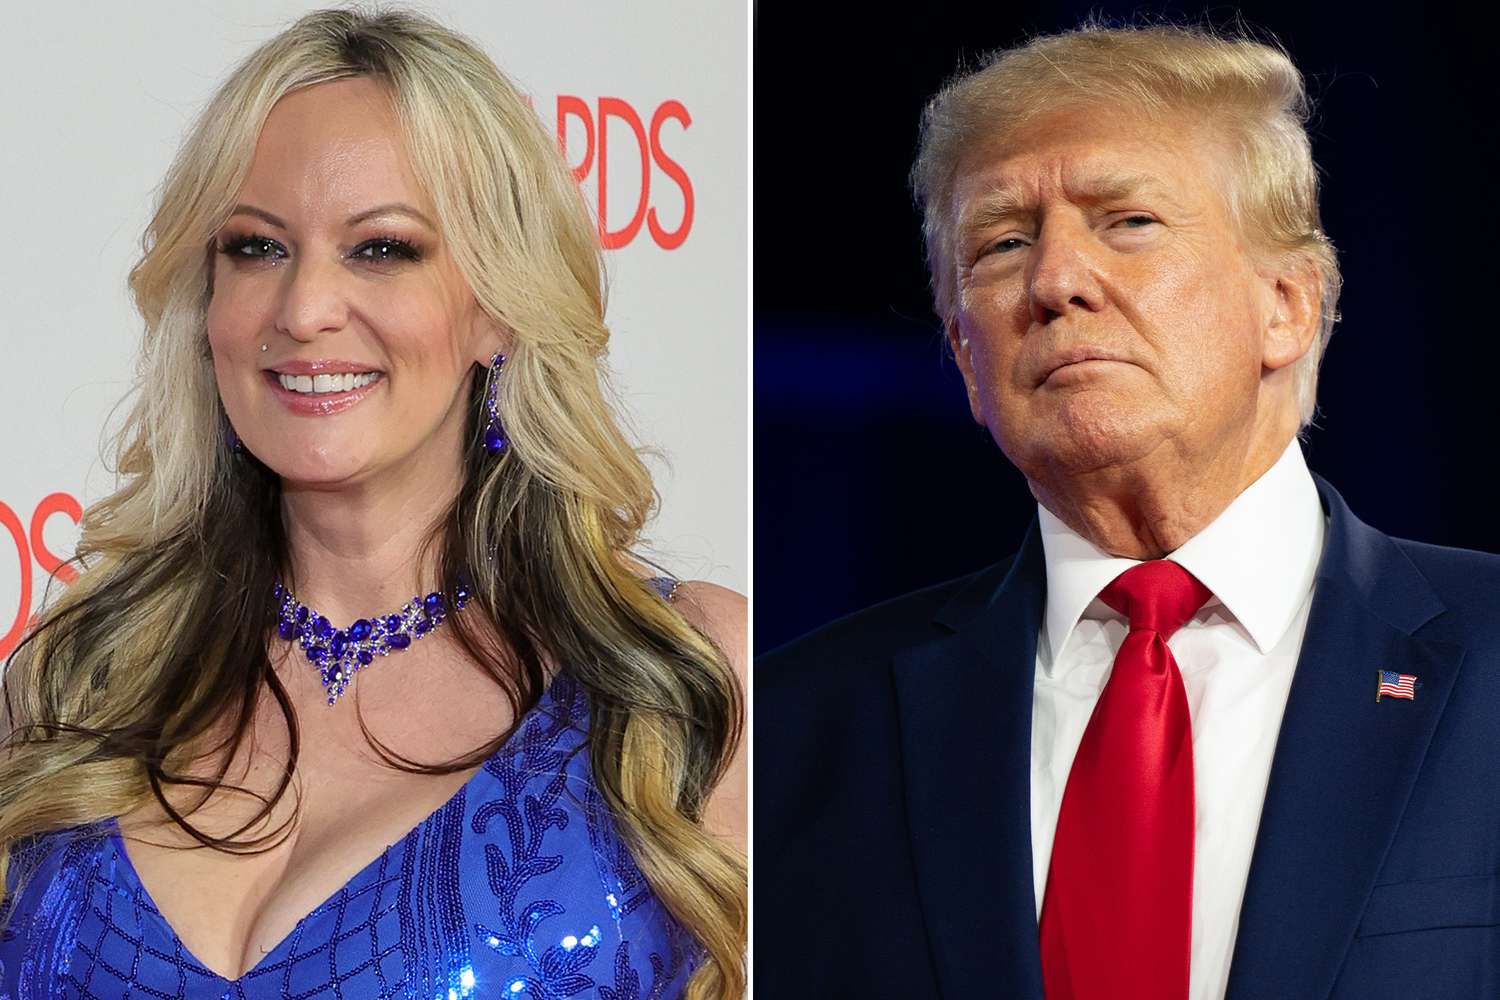 Stormy Daniels Testifies in Donald Trump’s Trial: Details of Encounter and Hush Money Deal Revealed